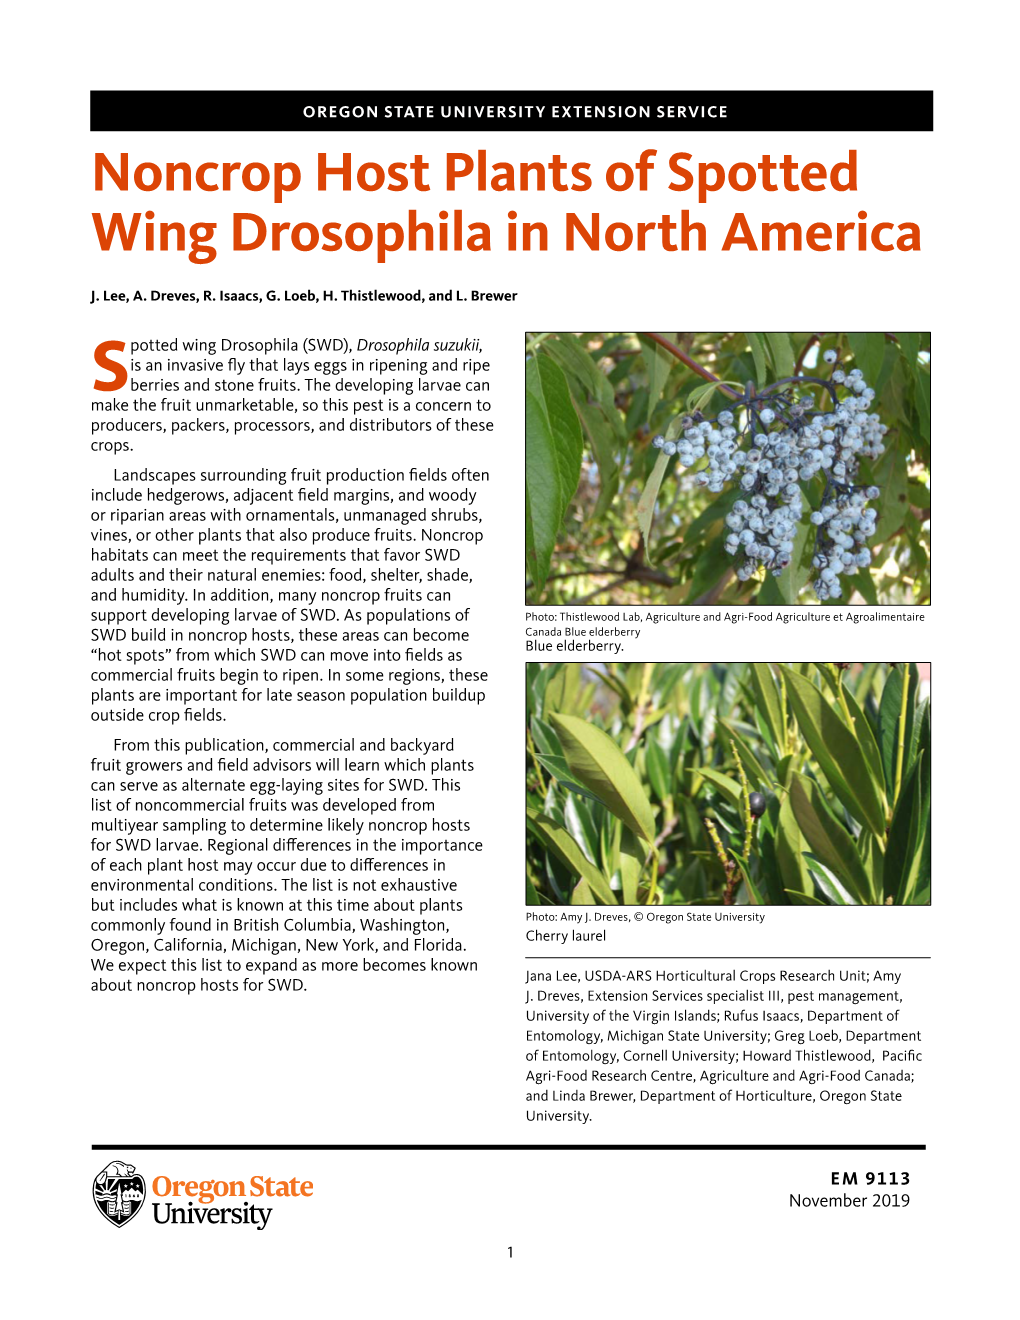 Noncrop Host Plants of Spotted Wing Drosophila in North America